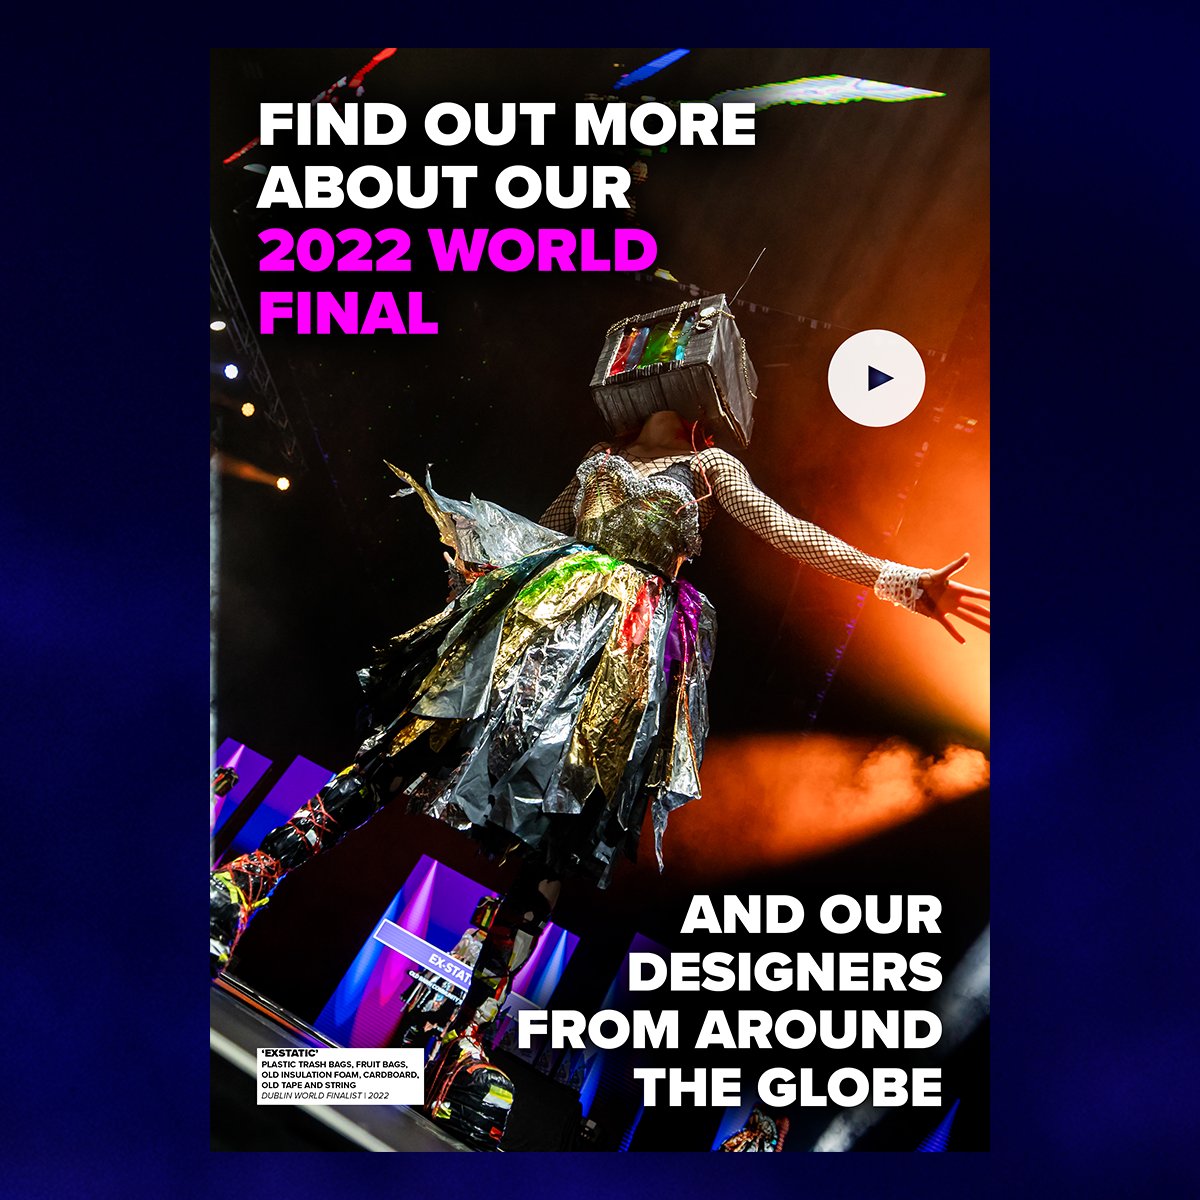 Follow along with Junk Kouture at the World Retail Congress as the world's youth join the discussion around the future of sustainable fashion 👏 Take a look at our WRC Design Showcase Programme here 🤩 junkkouture.com/wrc-programme/ In collboration with @Deloitte